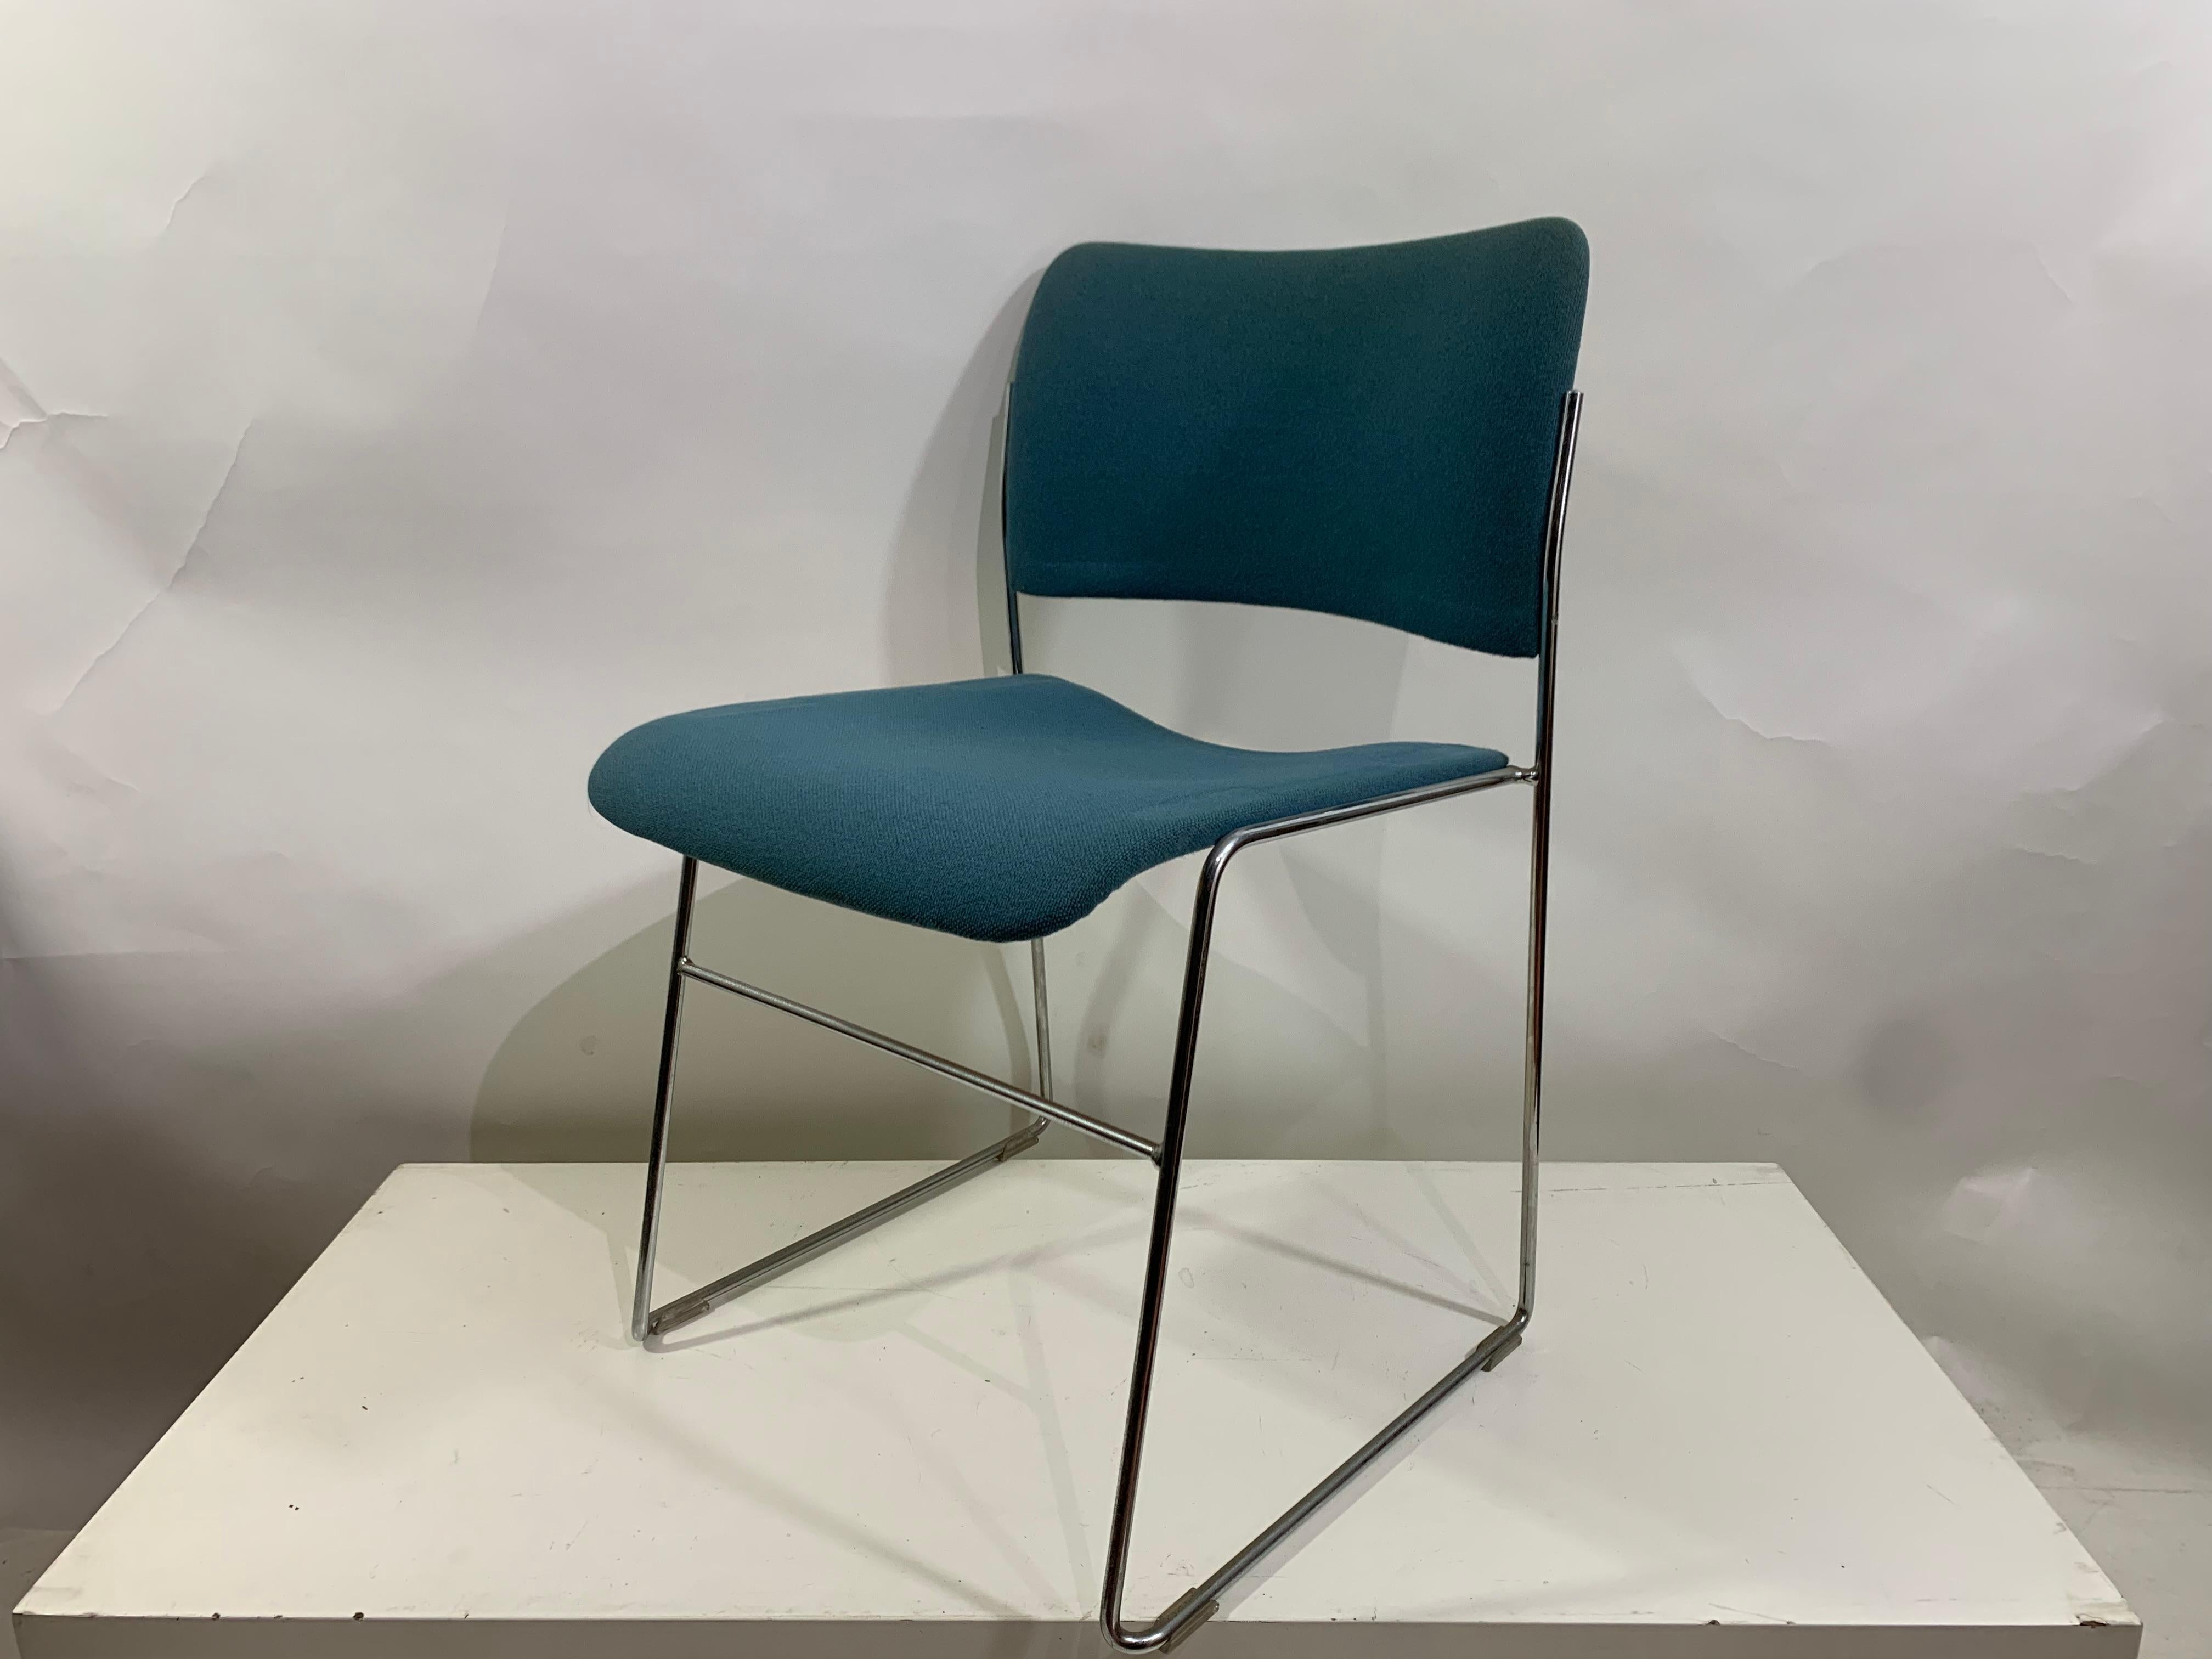 David Rowland's 4/40 dining chairs are very comfortable and have been awarded many design awards.
The chairs are stackable, made with metal wire chrome frame and metal sculpted seat and back in blue upholstery fabric.

This stackable chair can be